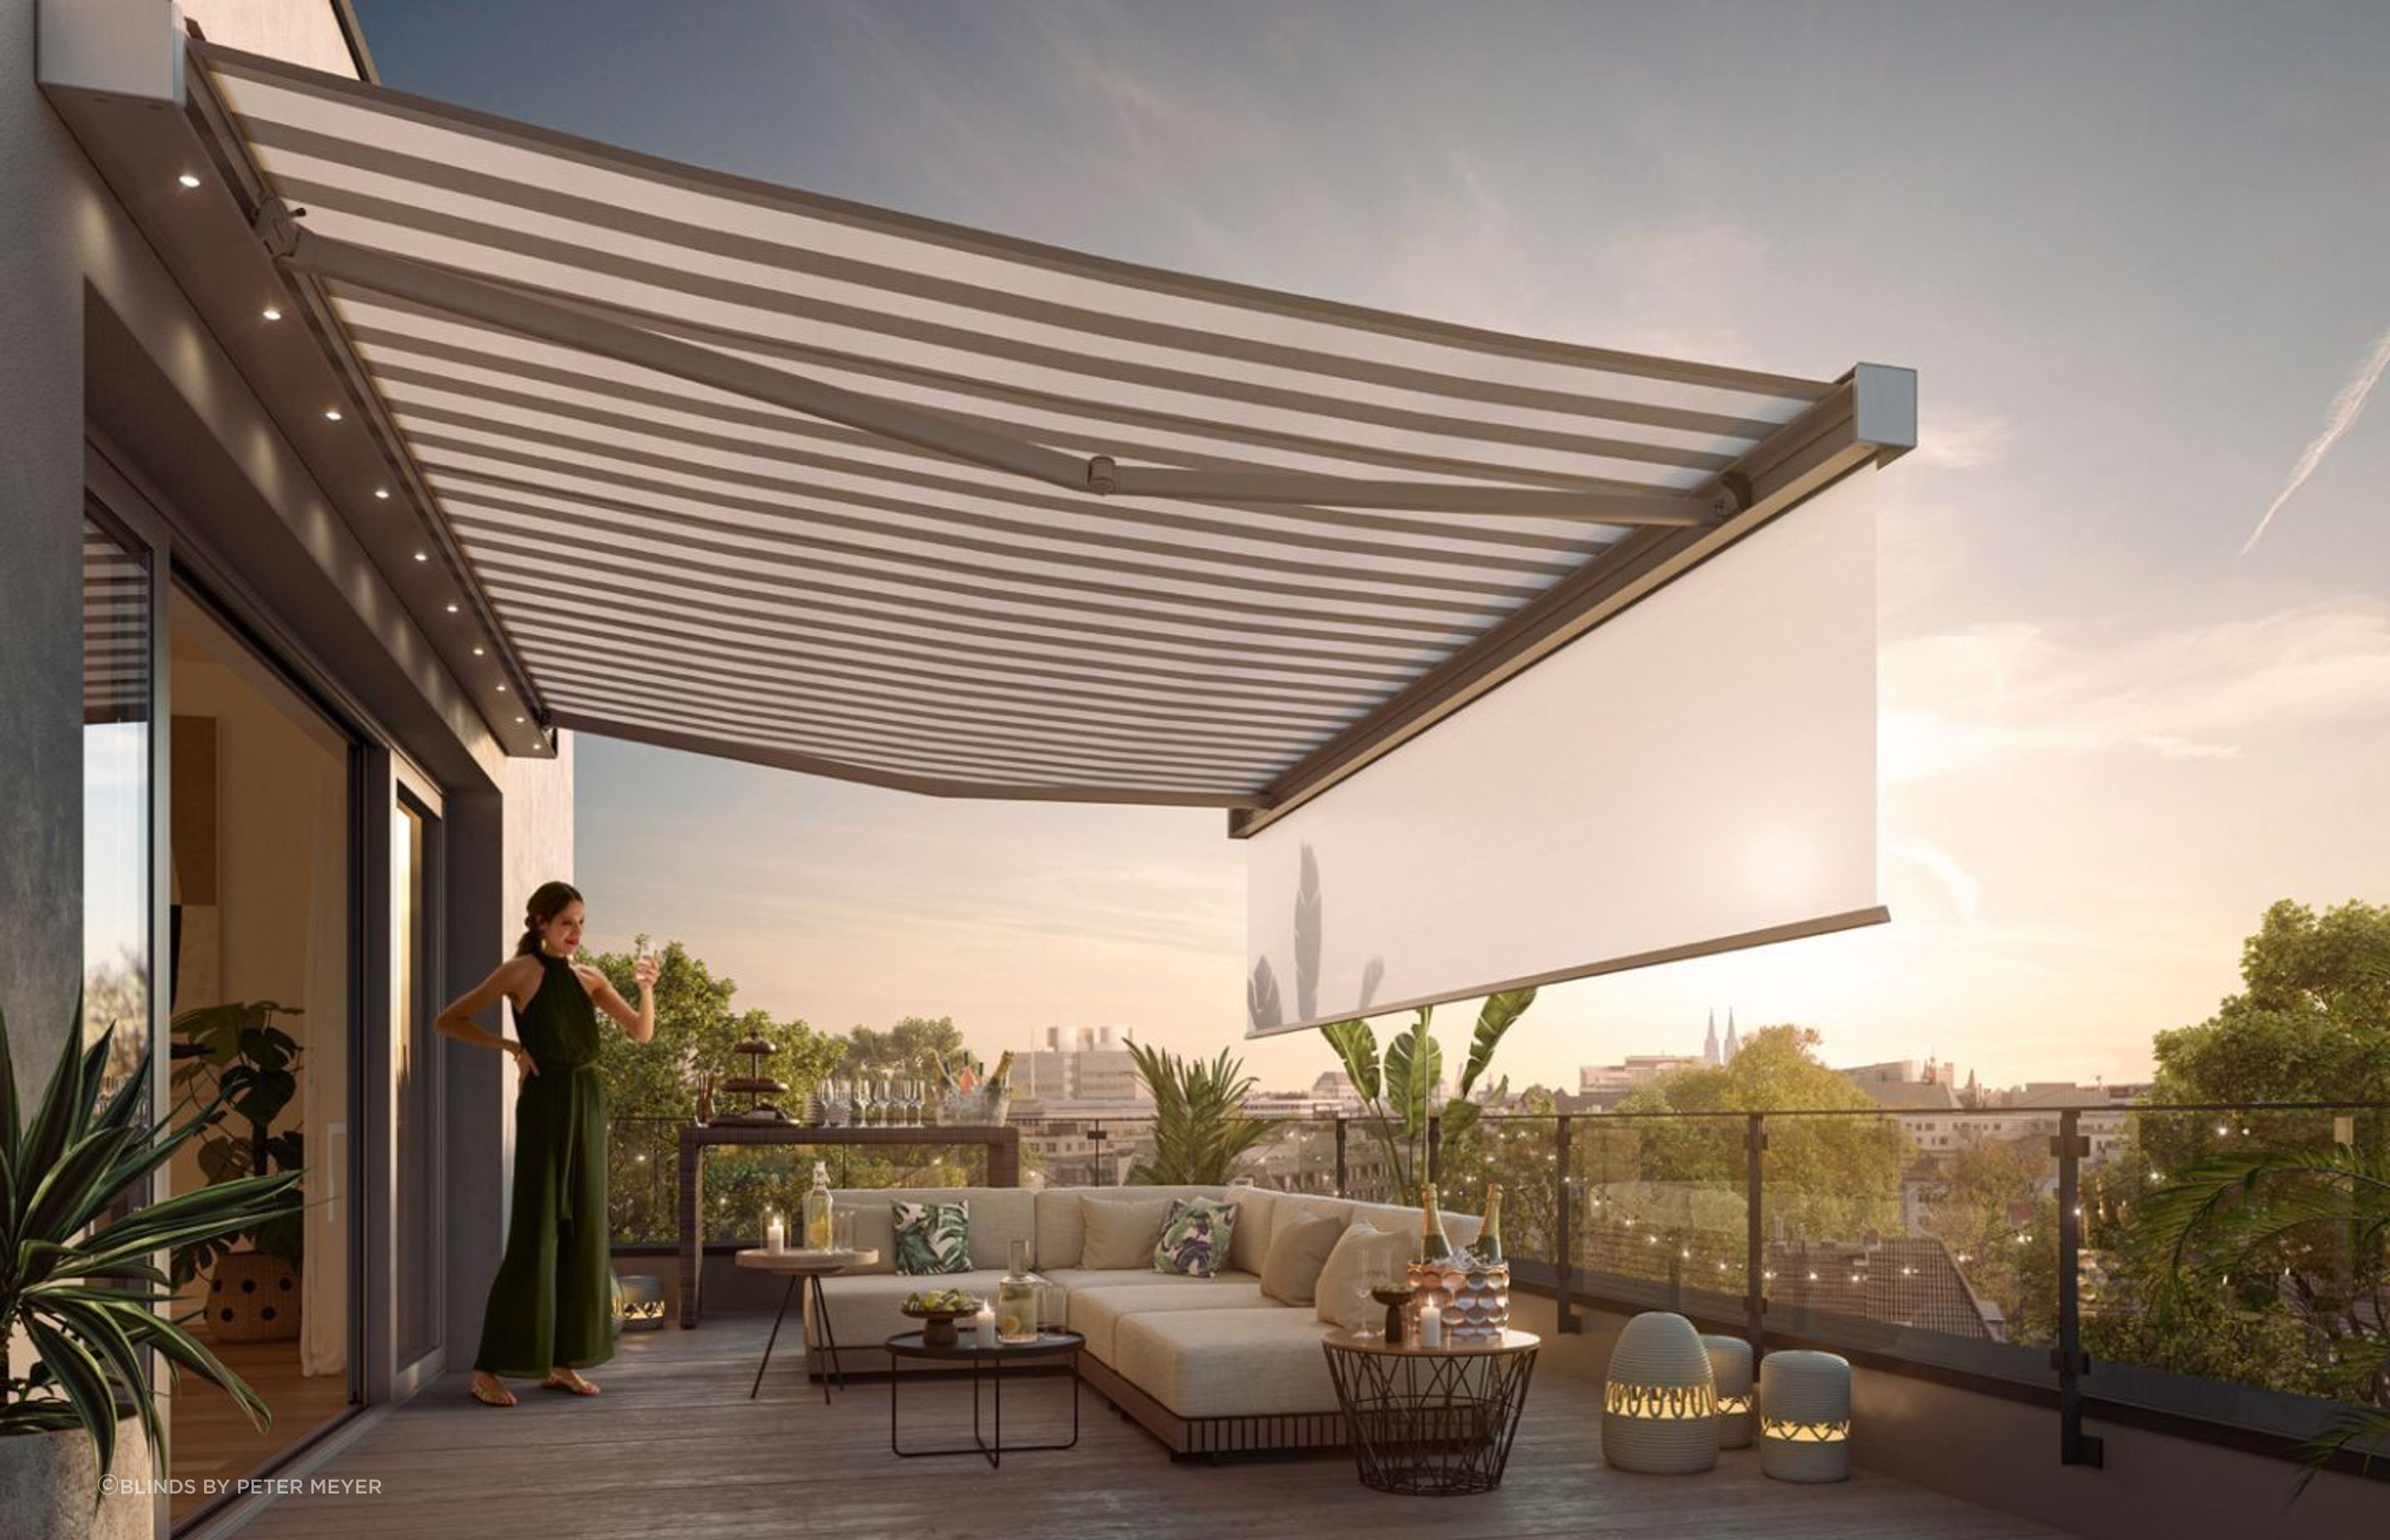 Awnings offer essential sun protection by creating shaded areas, which is especially valuable in hot and sunny climates.